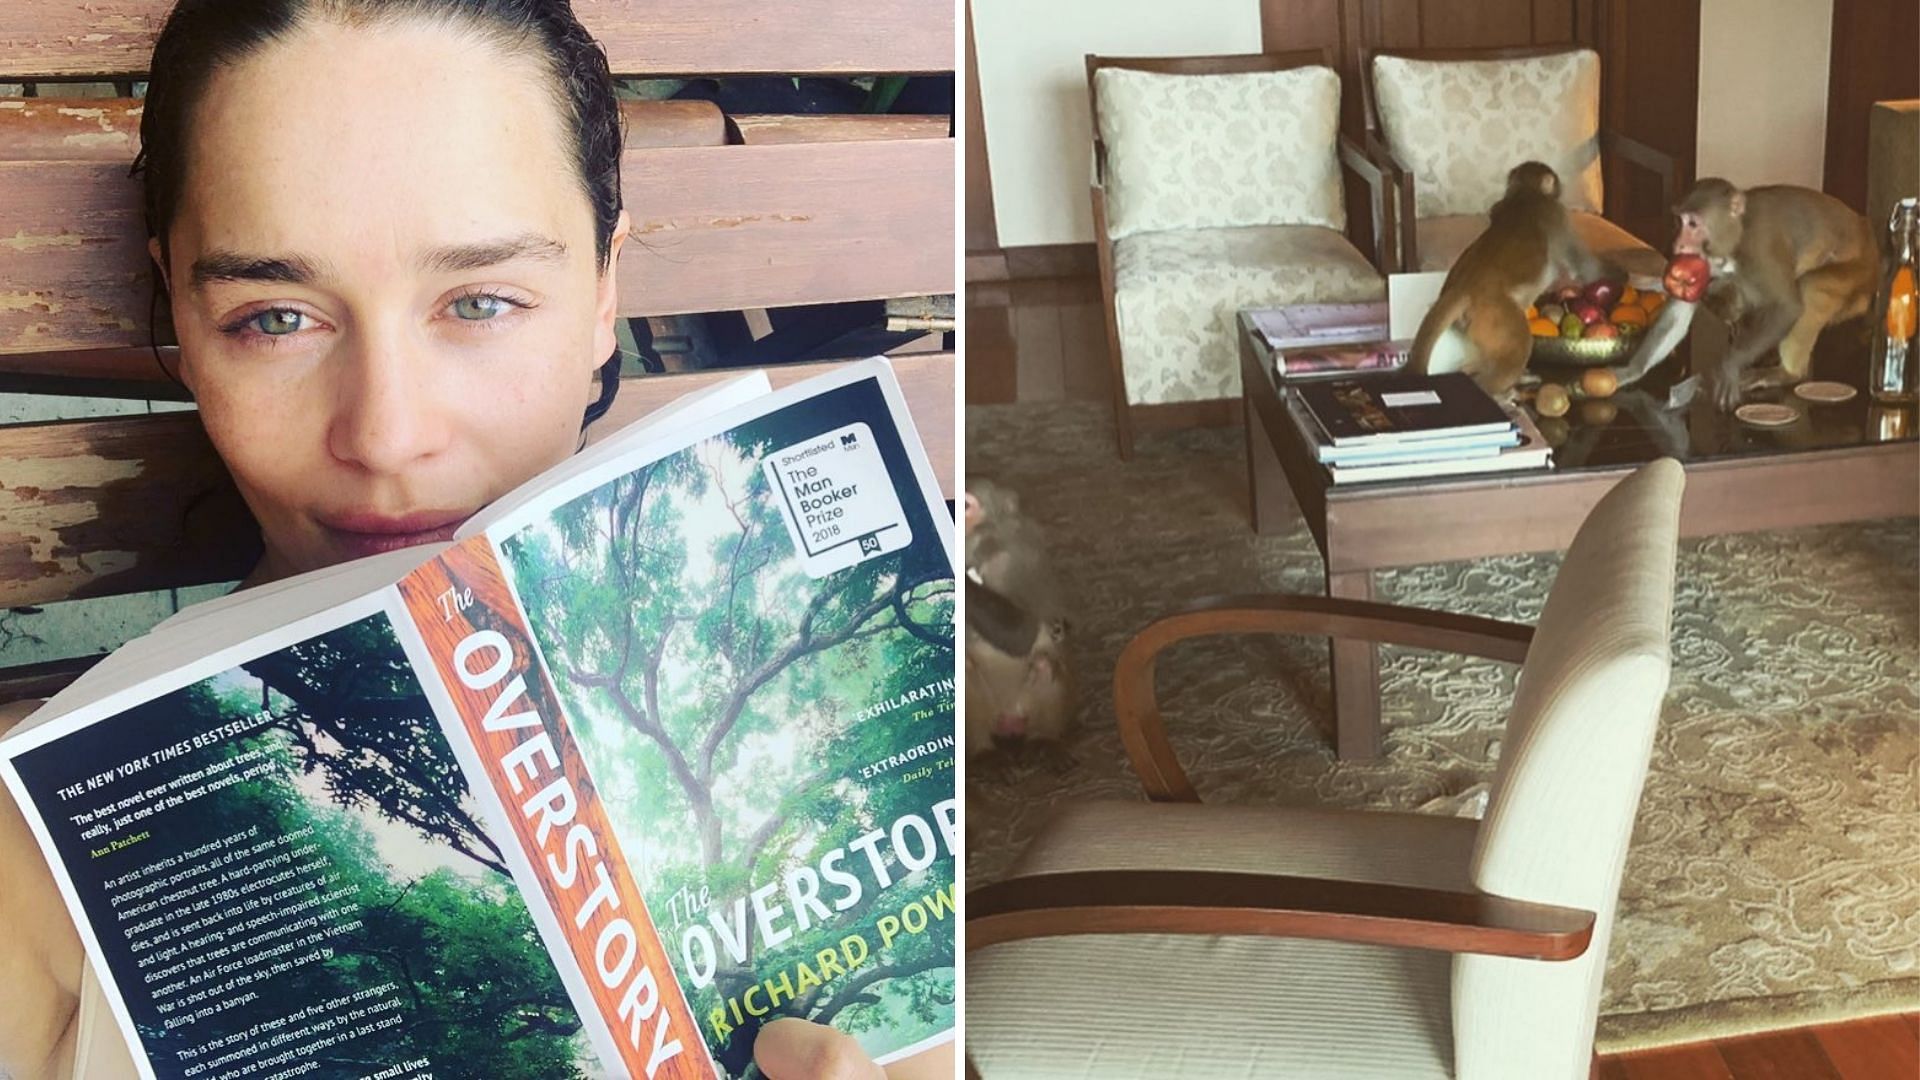 Emilia Clarke is currently vacationing in India.